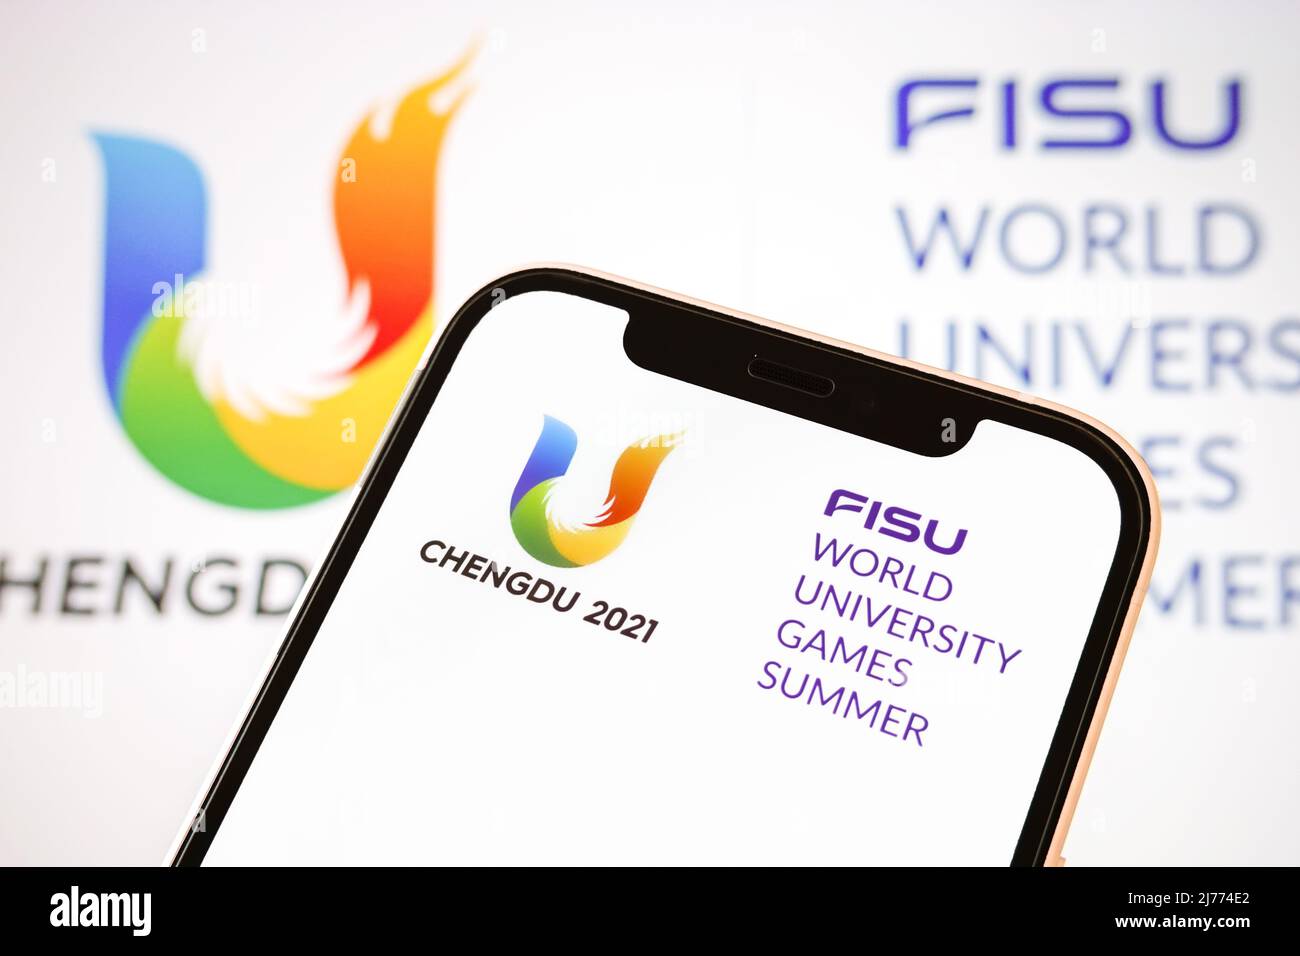 In this photo illustration, the logo of Chengdu World University Games is displayed on a smartphone screen. The Chengdu 2021 World University Games has been postponed until 2023, the International University Sports Federation (FISU) announced on Friday.The FISU Games had initially been scheduled for the summer of 2021 but were rescheduled for June this year following the postponement of the Olympic Games in Tokyo 2020. (Photo by Sheldon Cooper / SOPA Images/Sipa USA) Stock Photo